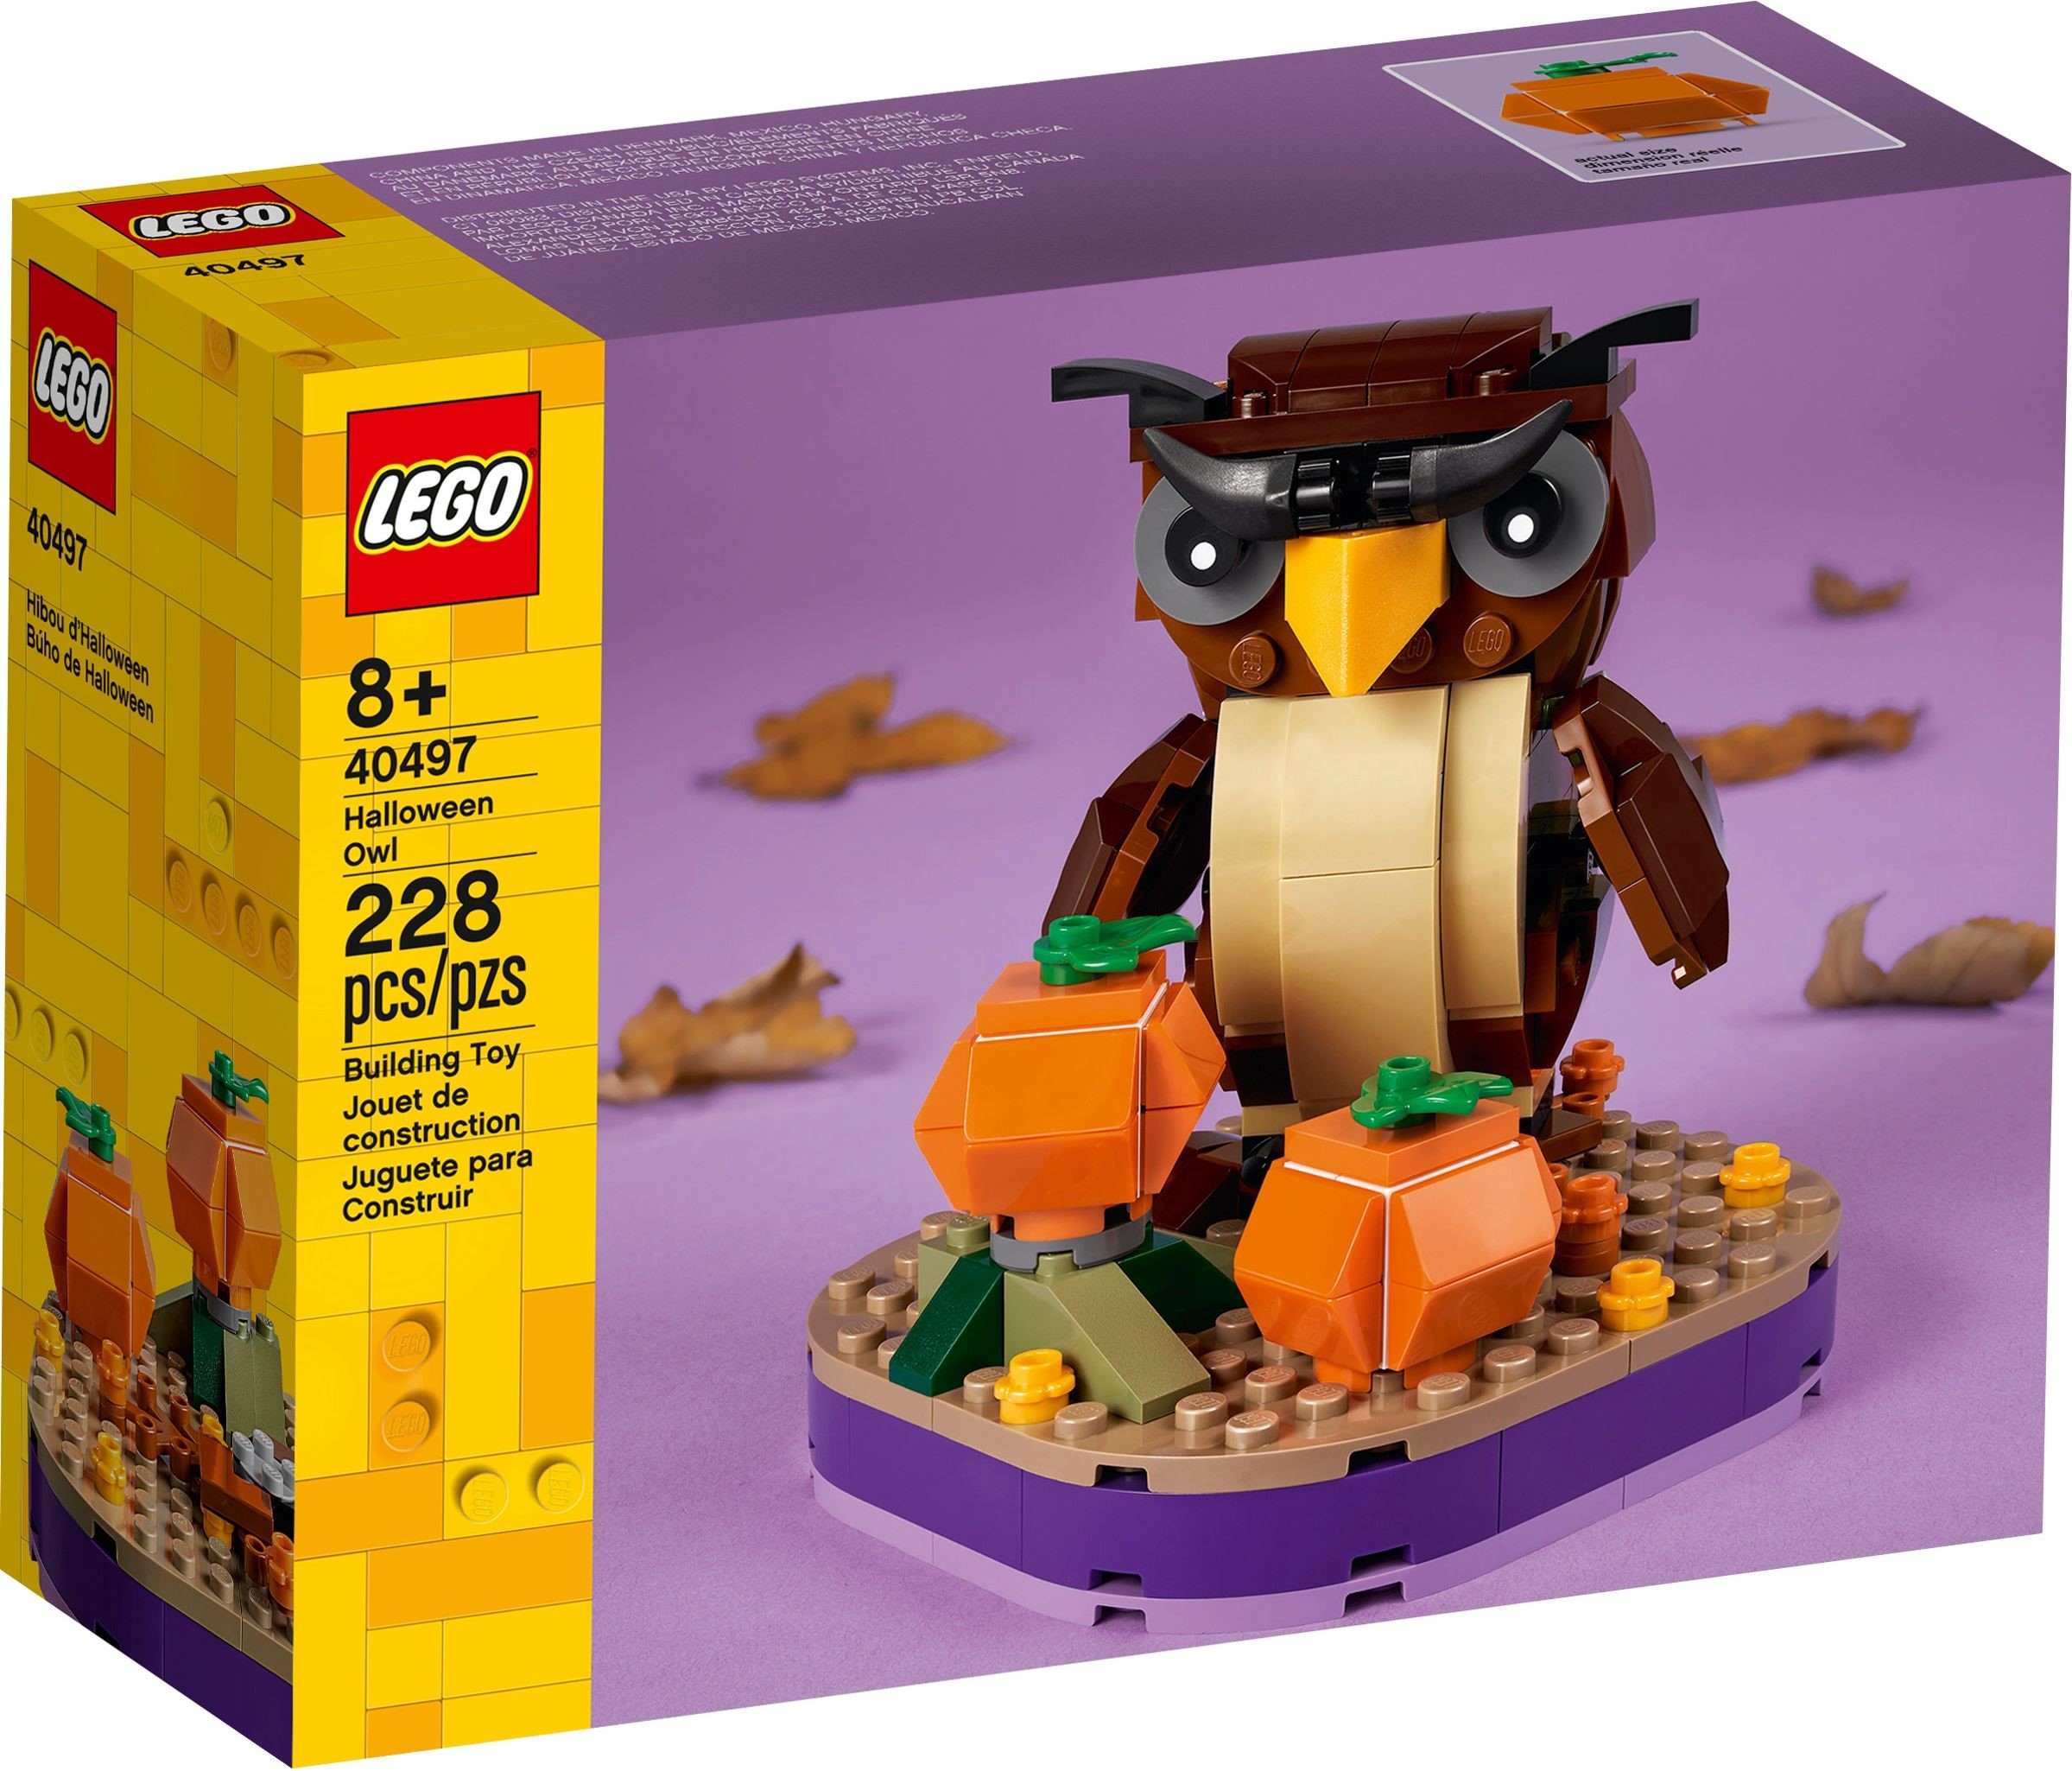 Lego Seasonal 2021 Halloween Official Images And Set Details The Brick Fan